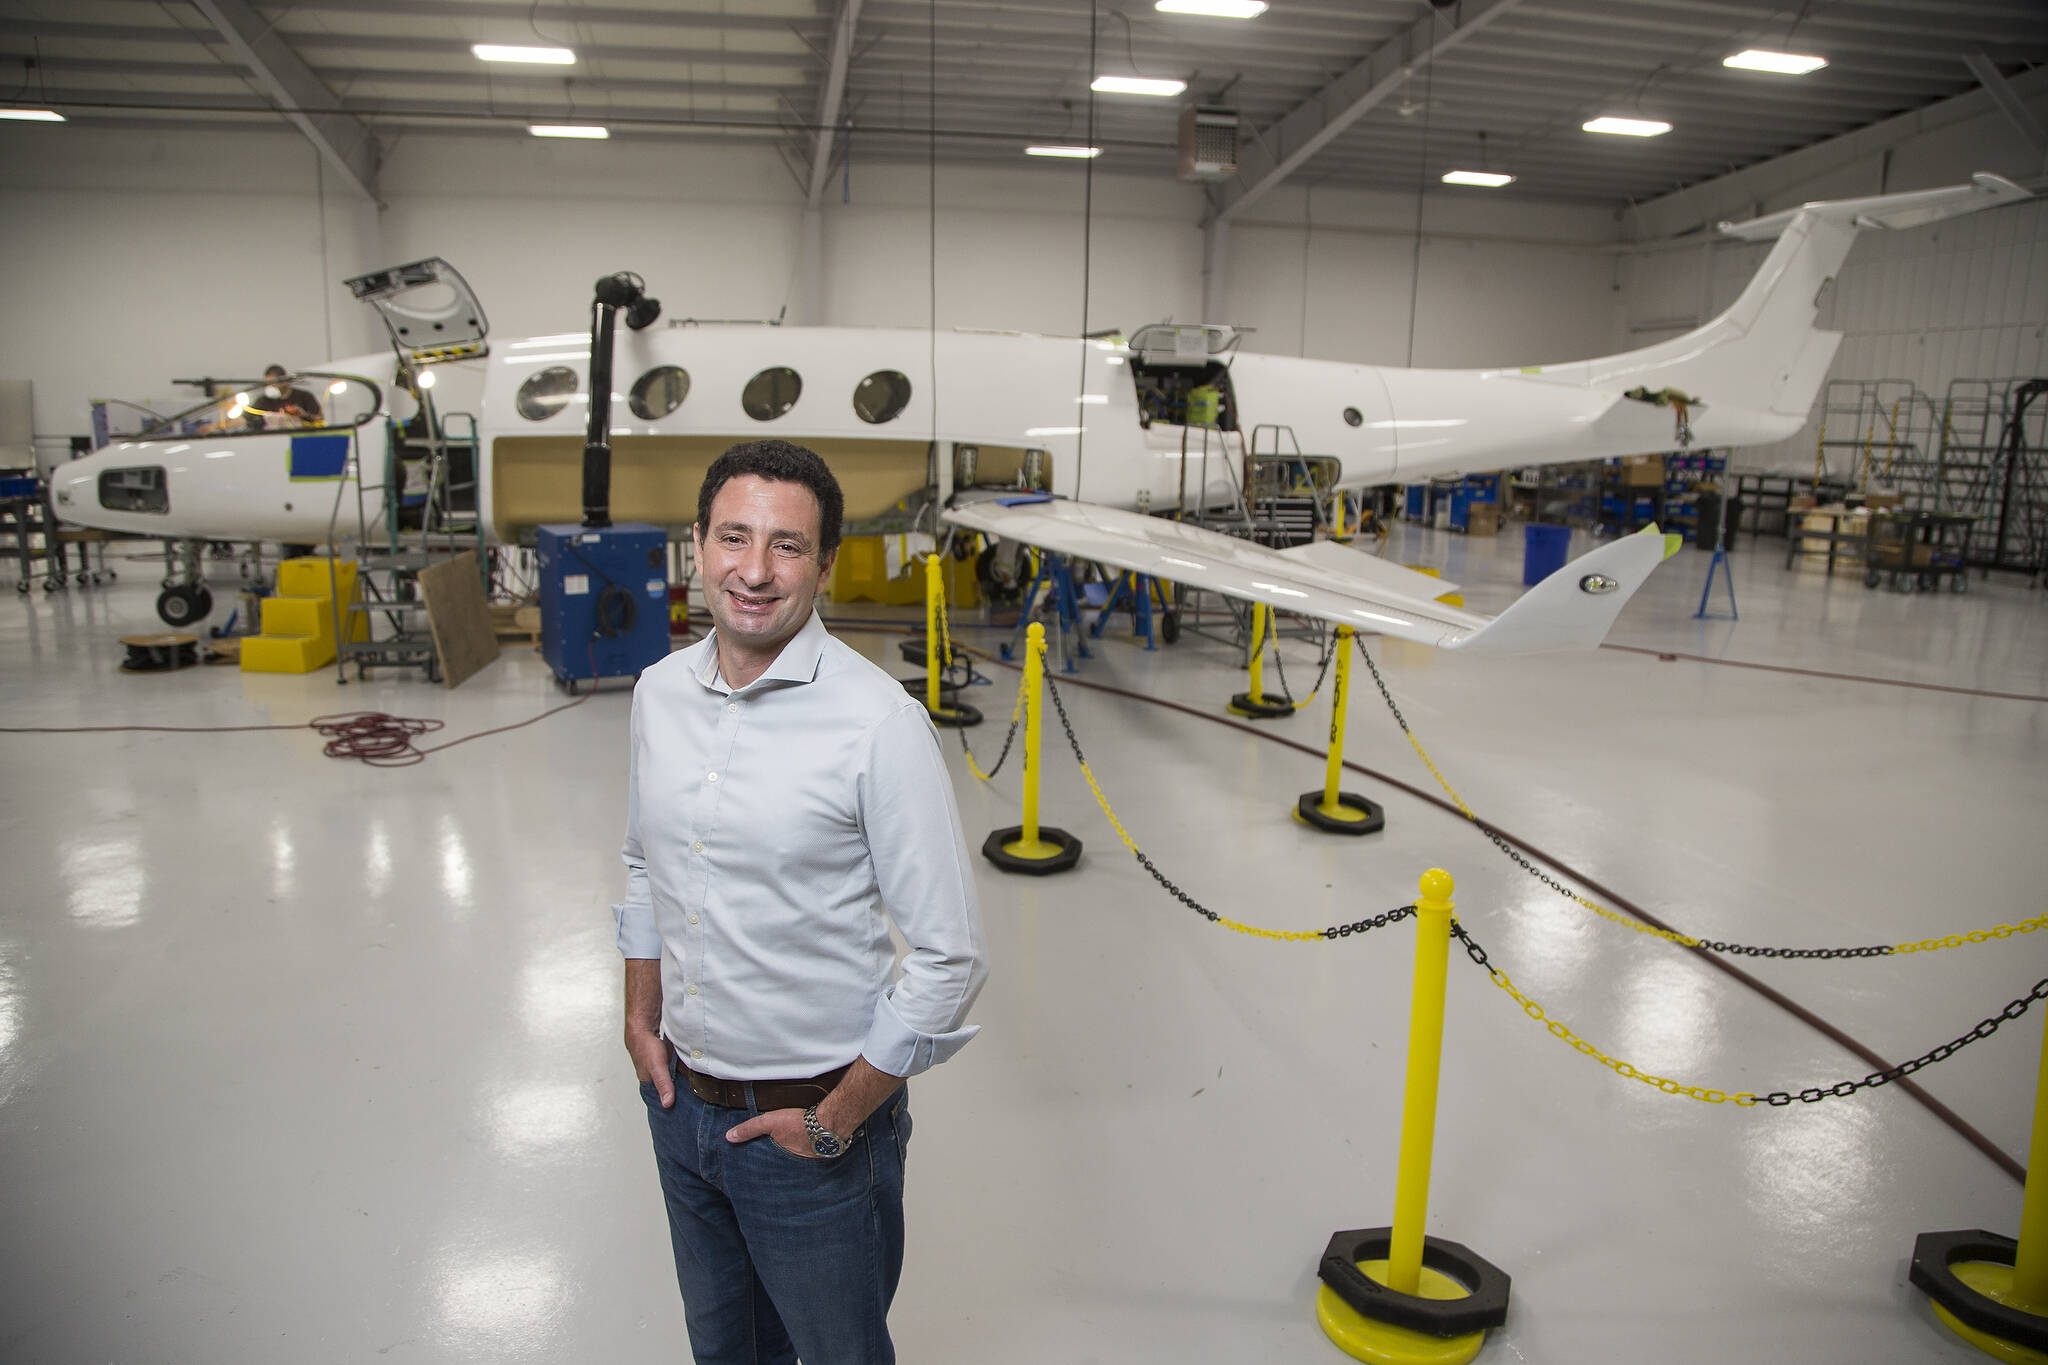 Eviation co-founder and CEO Omer Bar-Yohay stands by the company’s all-electric plane, the Alice, at Eviation’s plant Sept. 8 in Arlington. (Andy Bronson / The Herald)